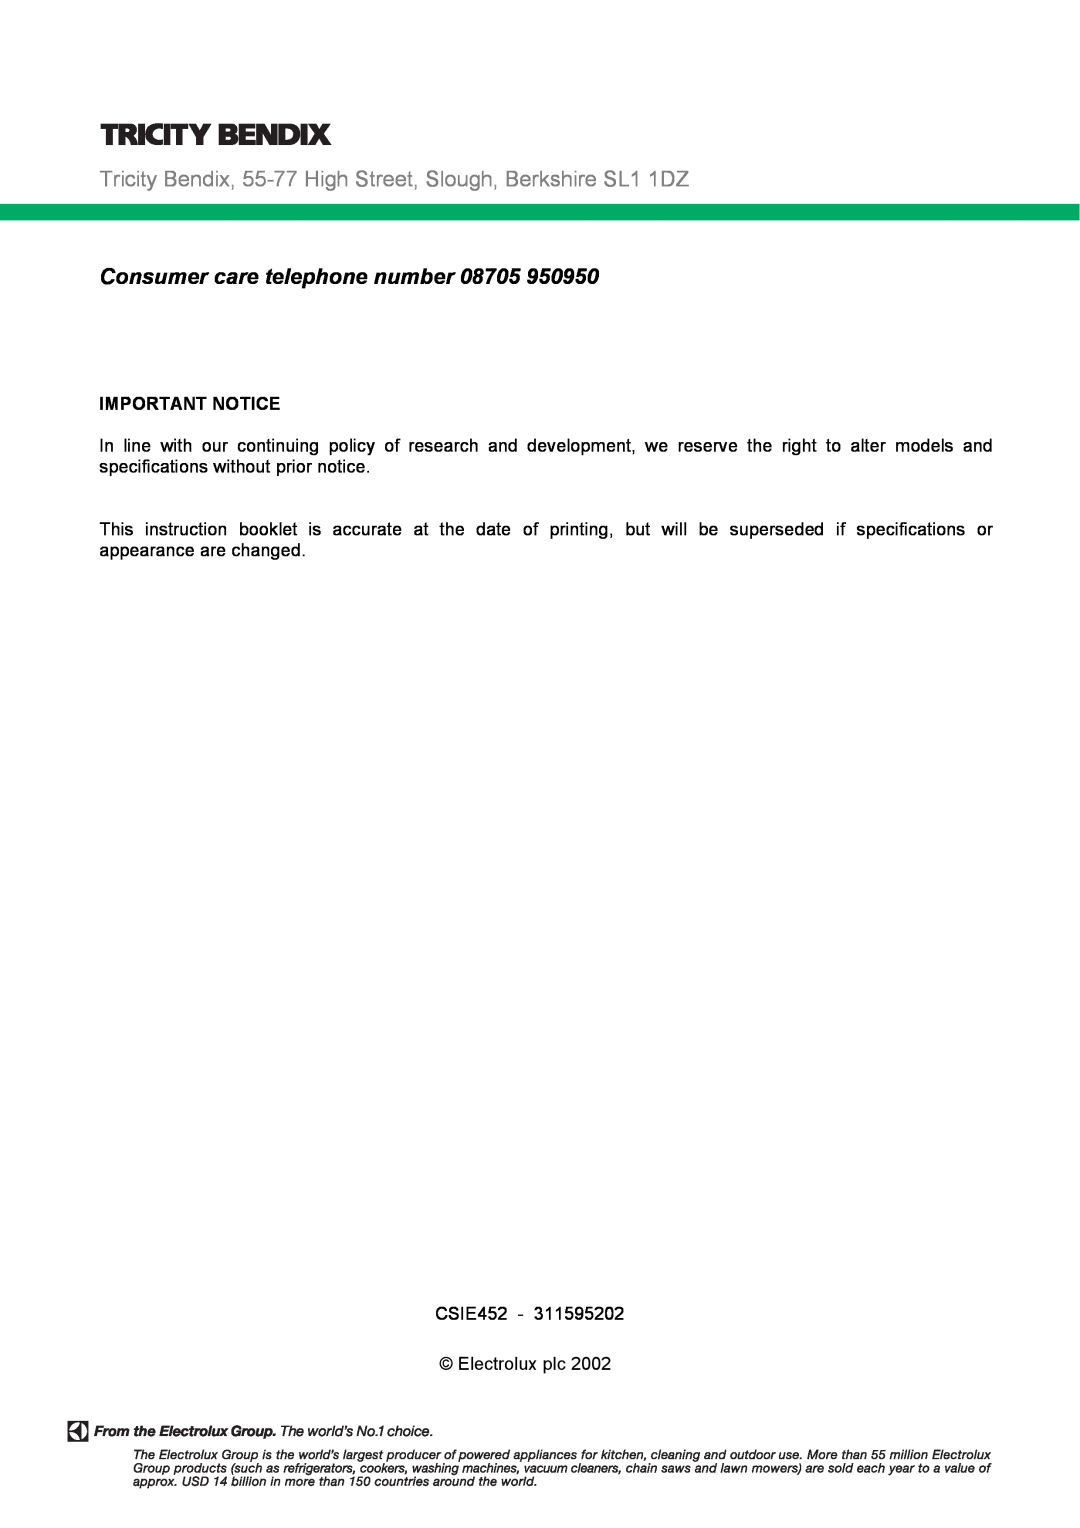 Tricity Bendix CSIE452 installation instructions Consumer care telephone number, Important Notice 